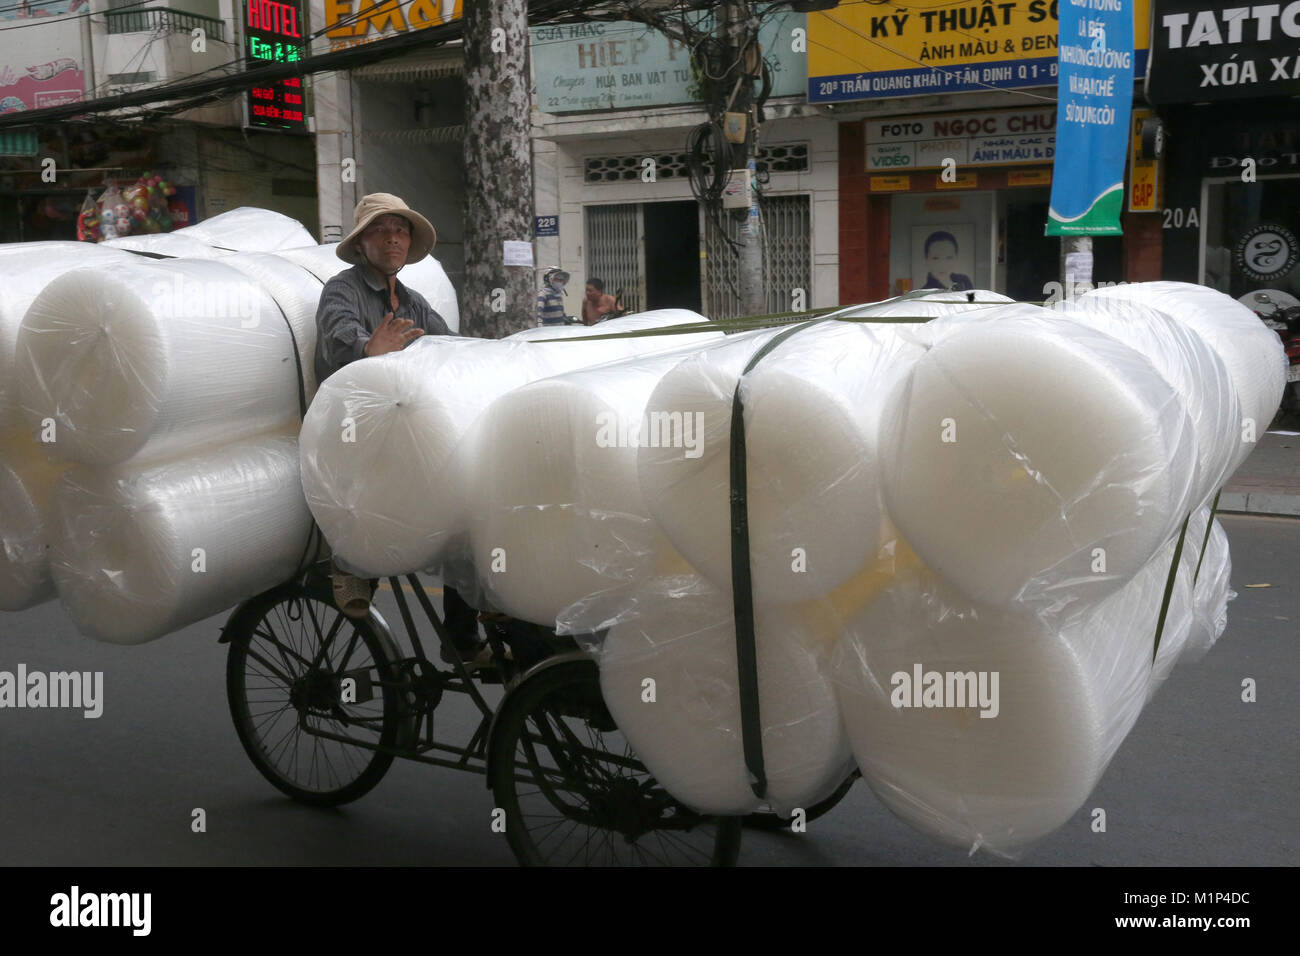 Man pedals a trishaw, loaded with rolls on a road, Ho Chi Minh City, Vietnam, Indochina, Southeast Asia, Asia Stock Photo